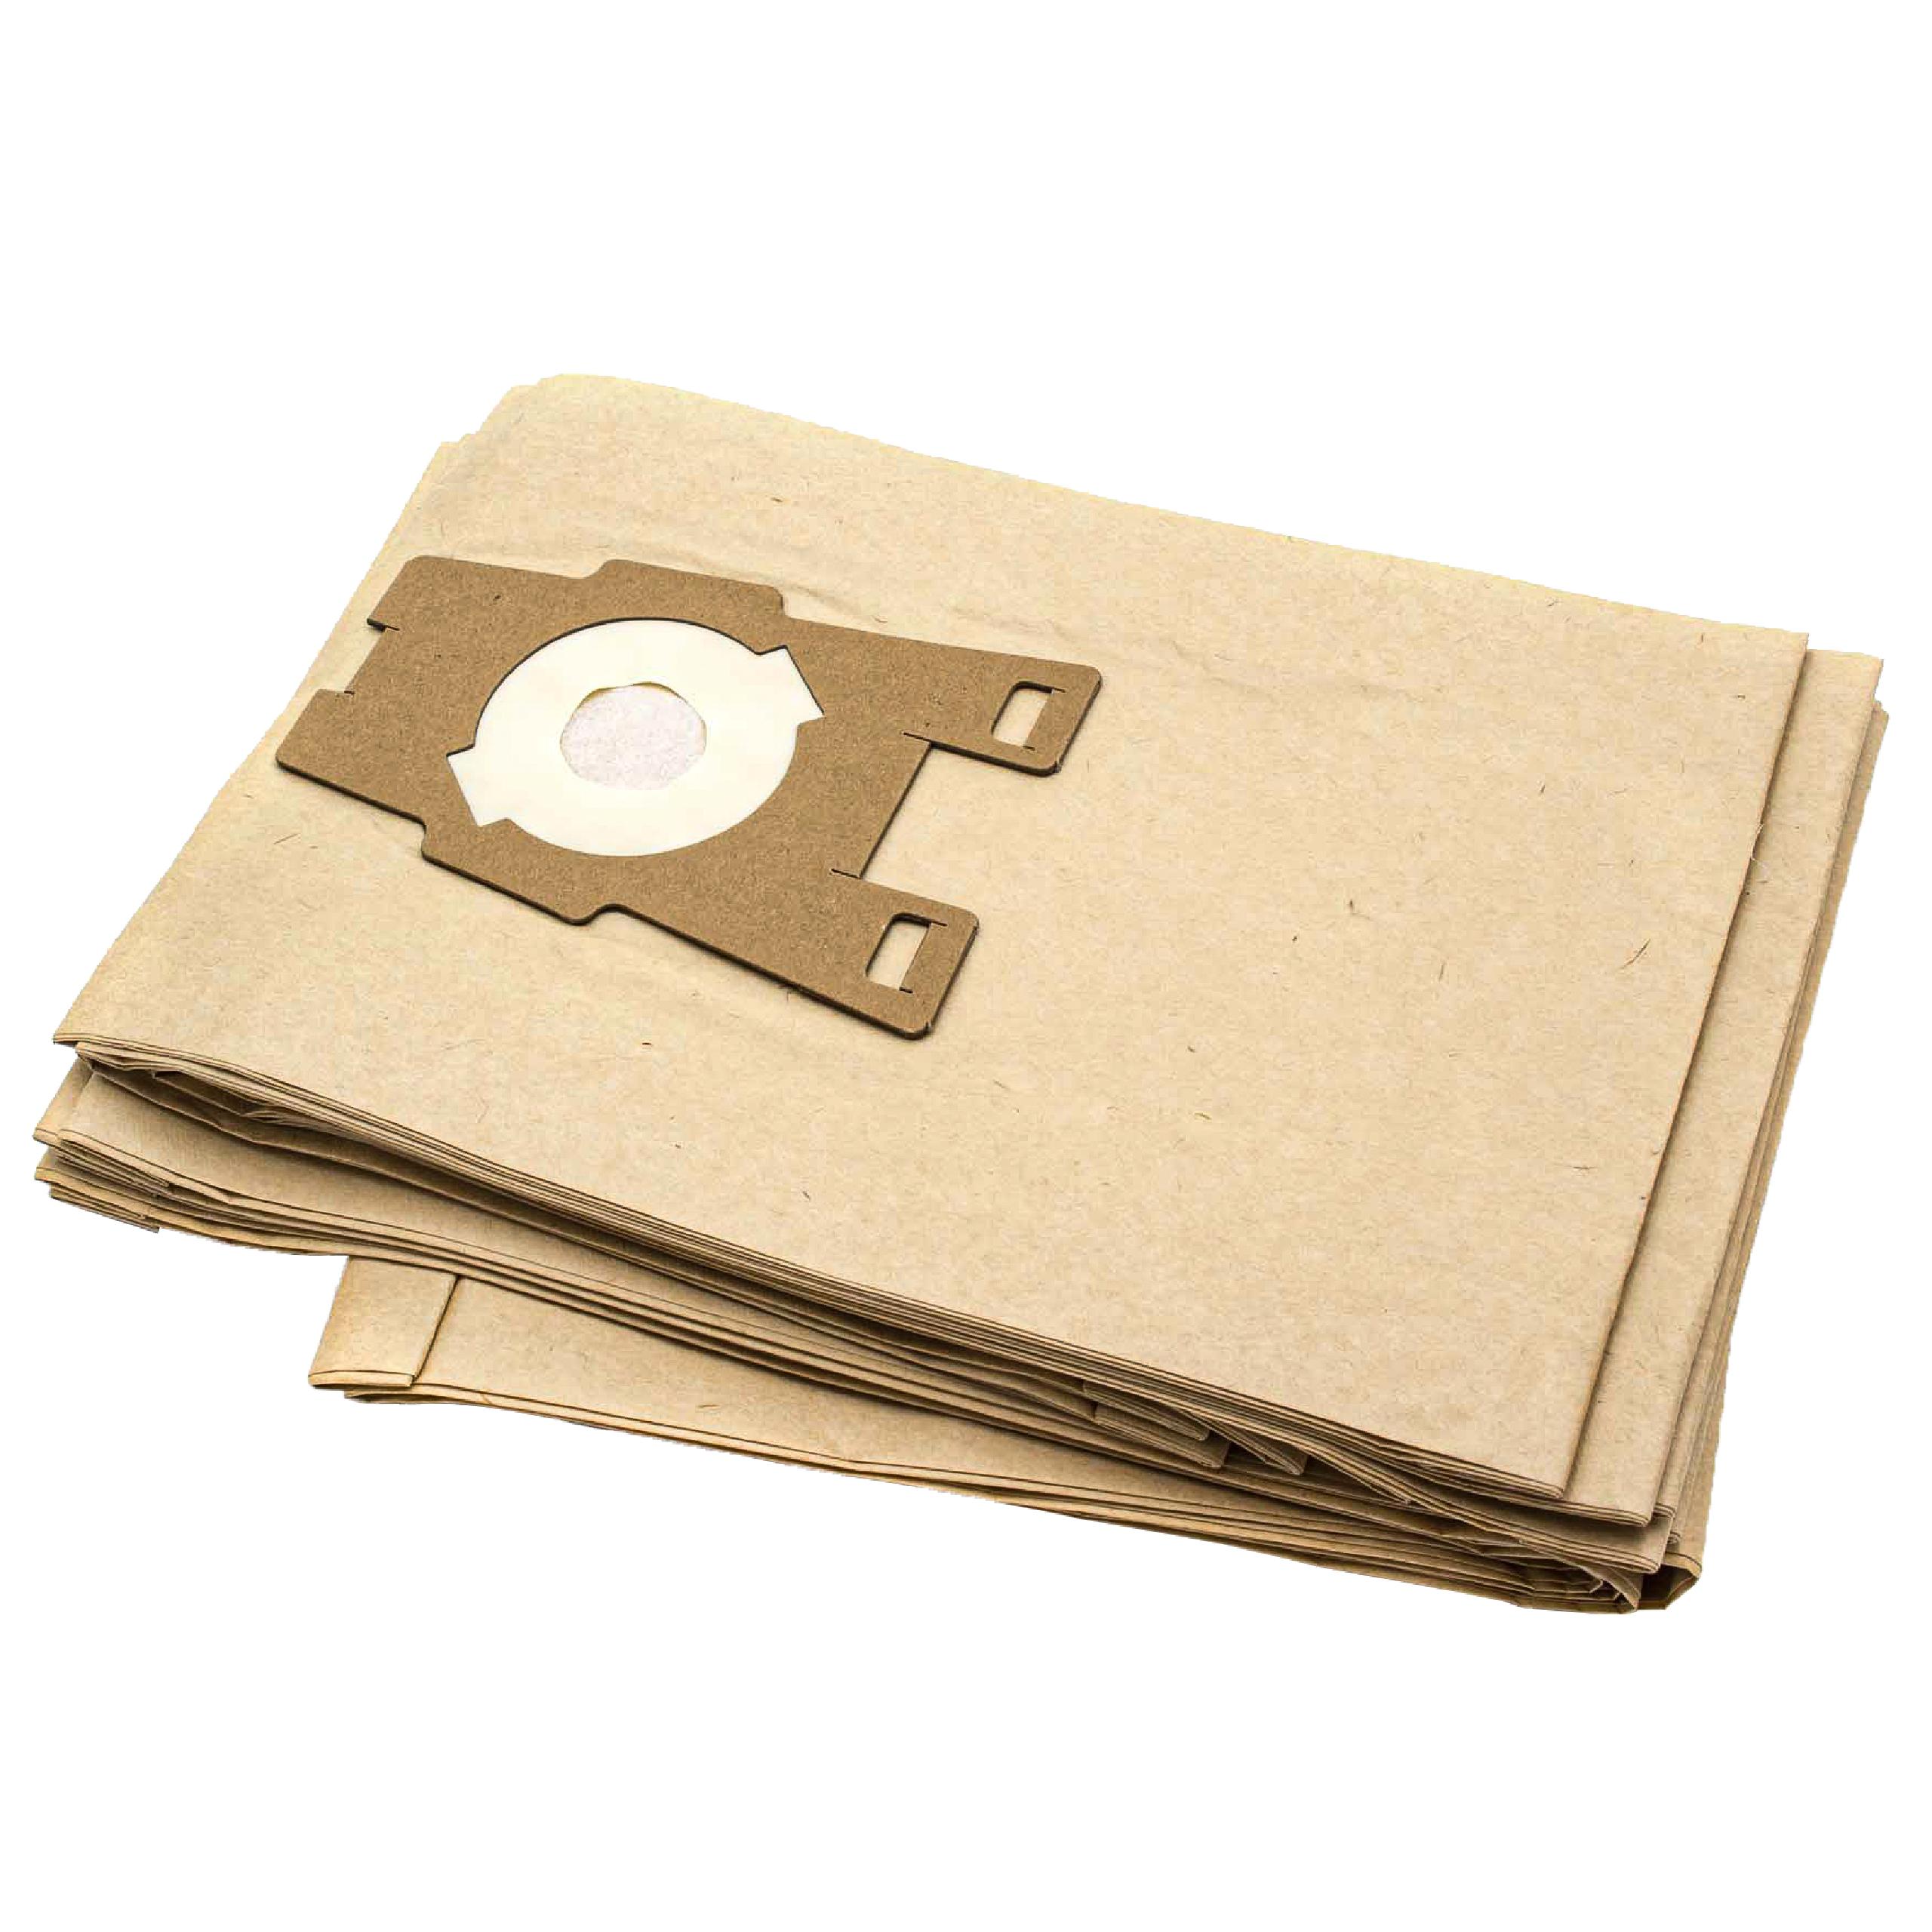 10x Vacuum Cleaner Bag replaces Kirby 197299, 197301, 204808, 204811, 197201 for Kirby - paper